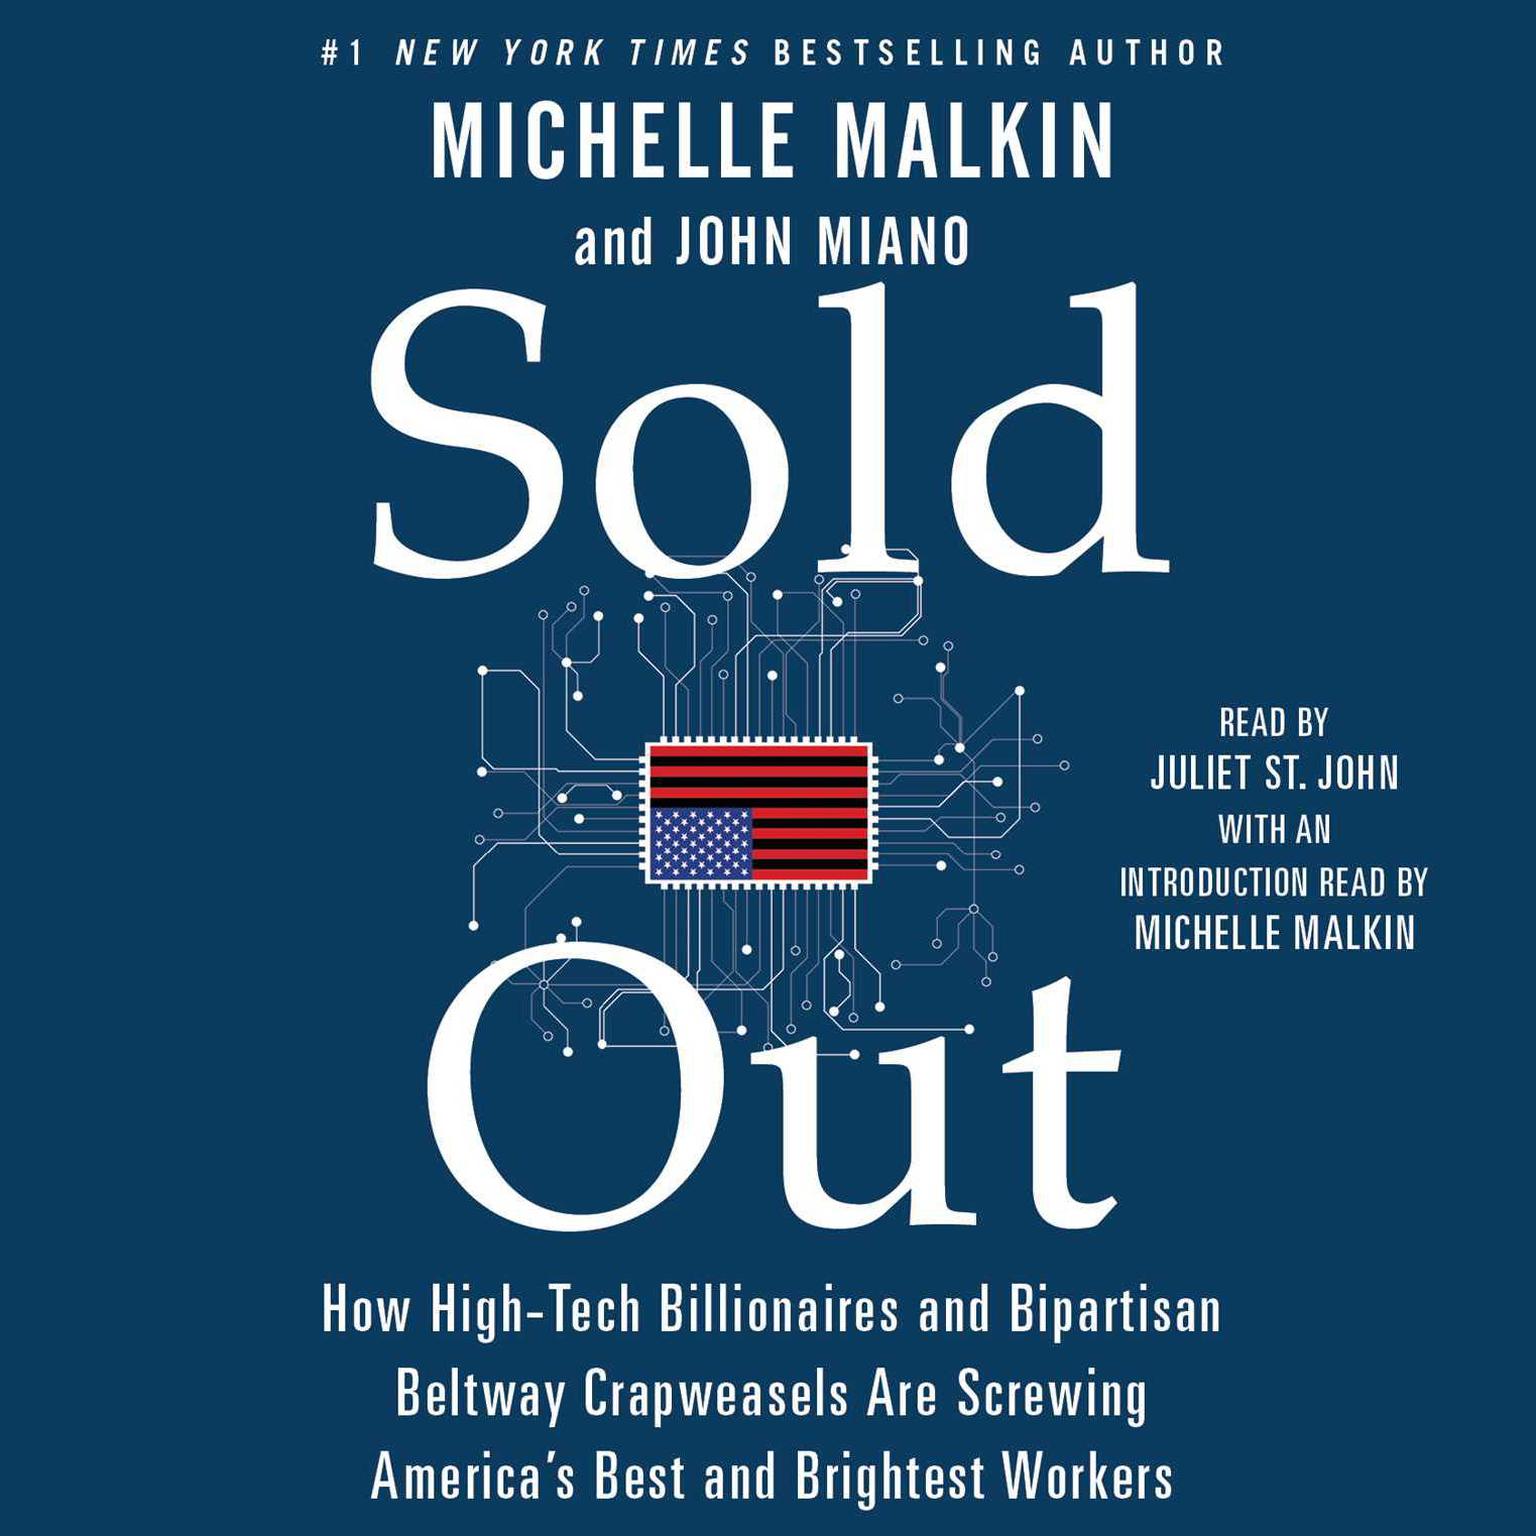 Sold Out: How High-Tech Billionaires & Bipartisan Beltway Crapweasels Are Screwing Americas Best & Brightest Workers Audiobook, by Michelle Malkin